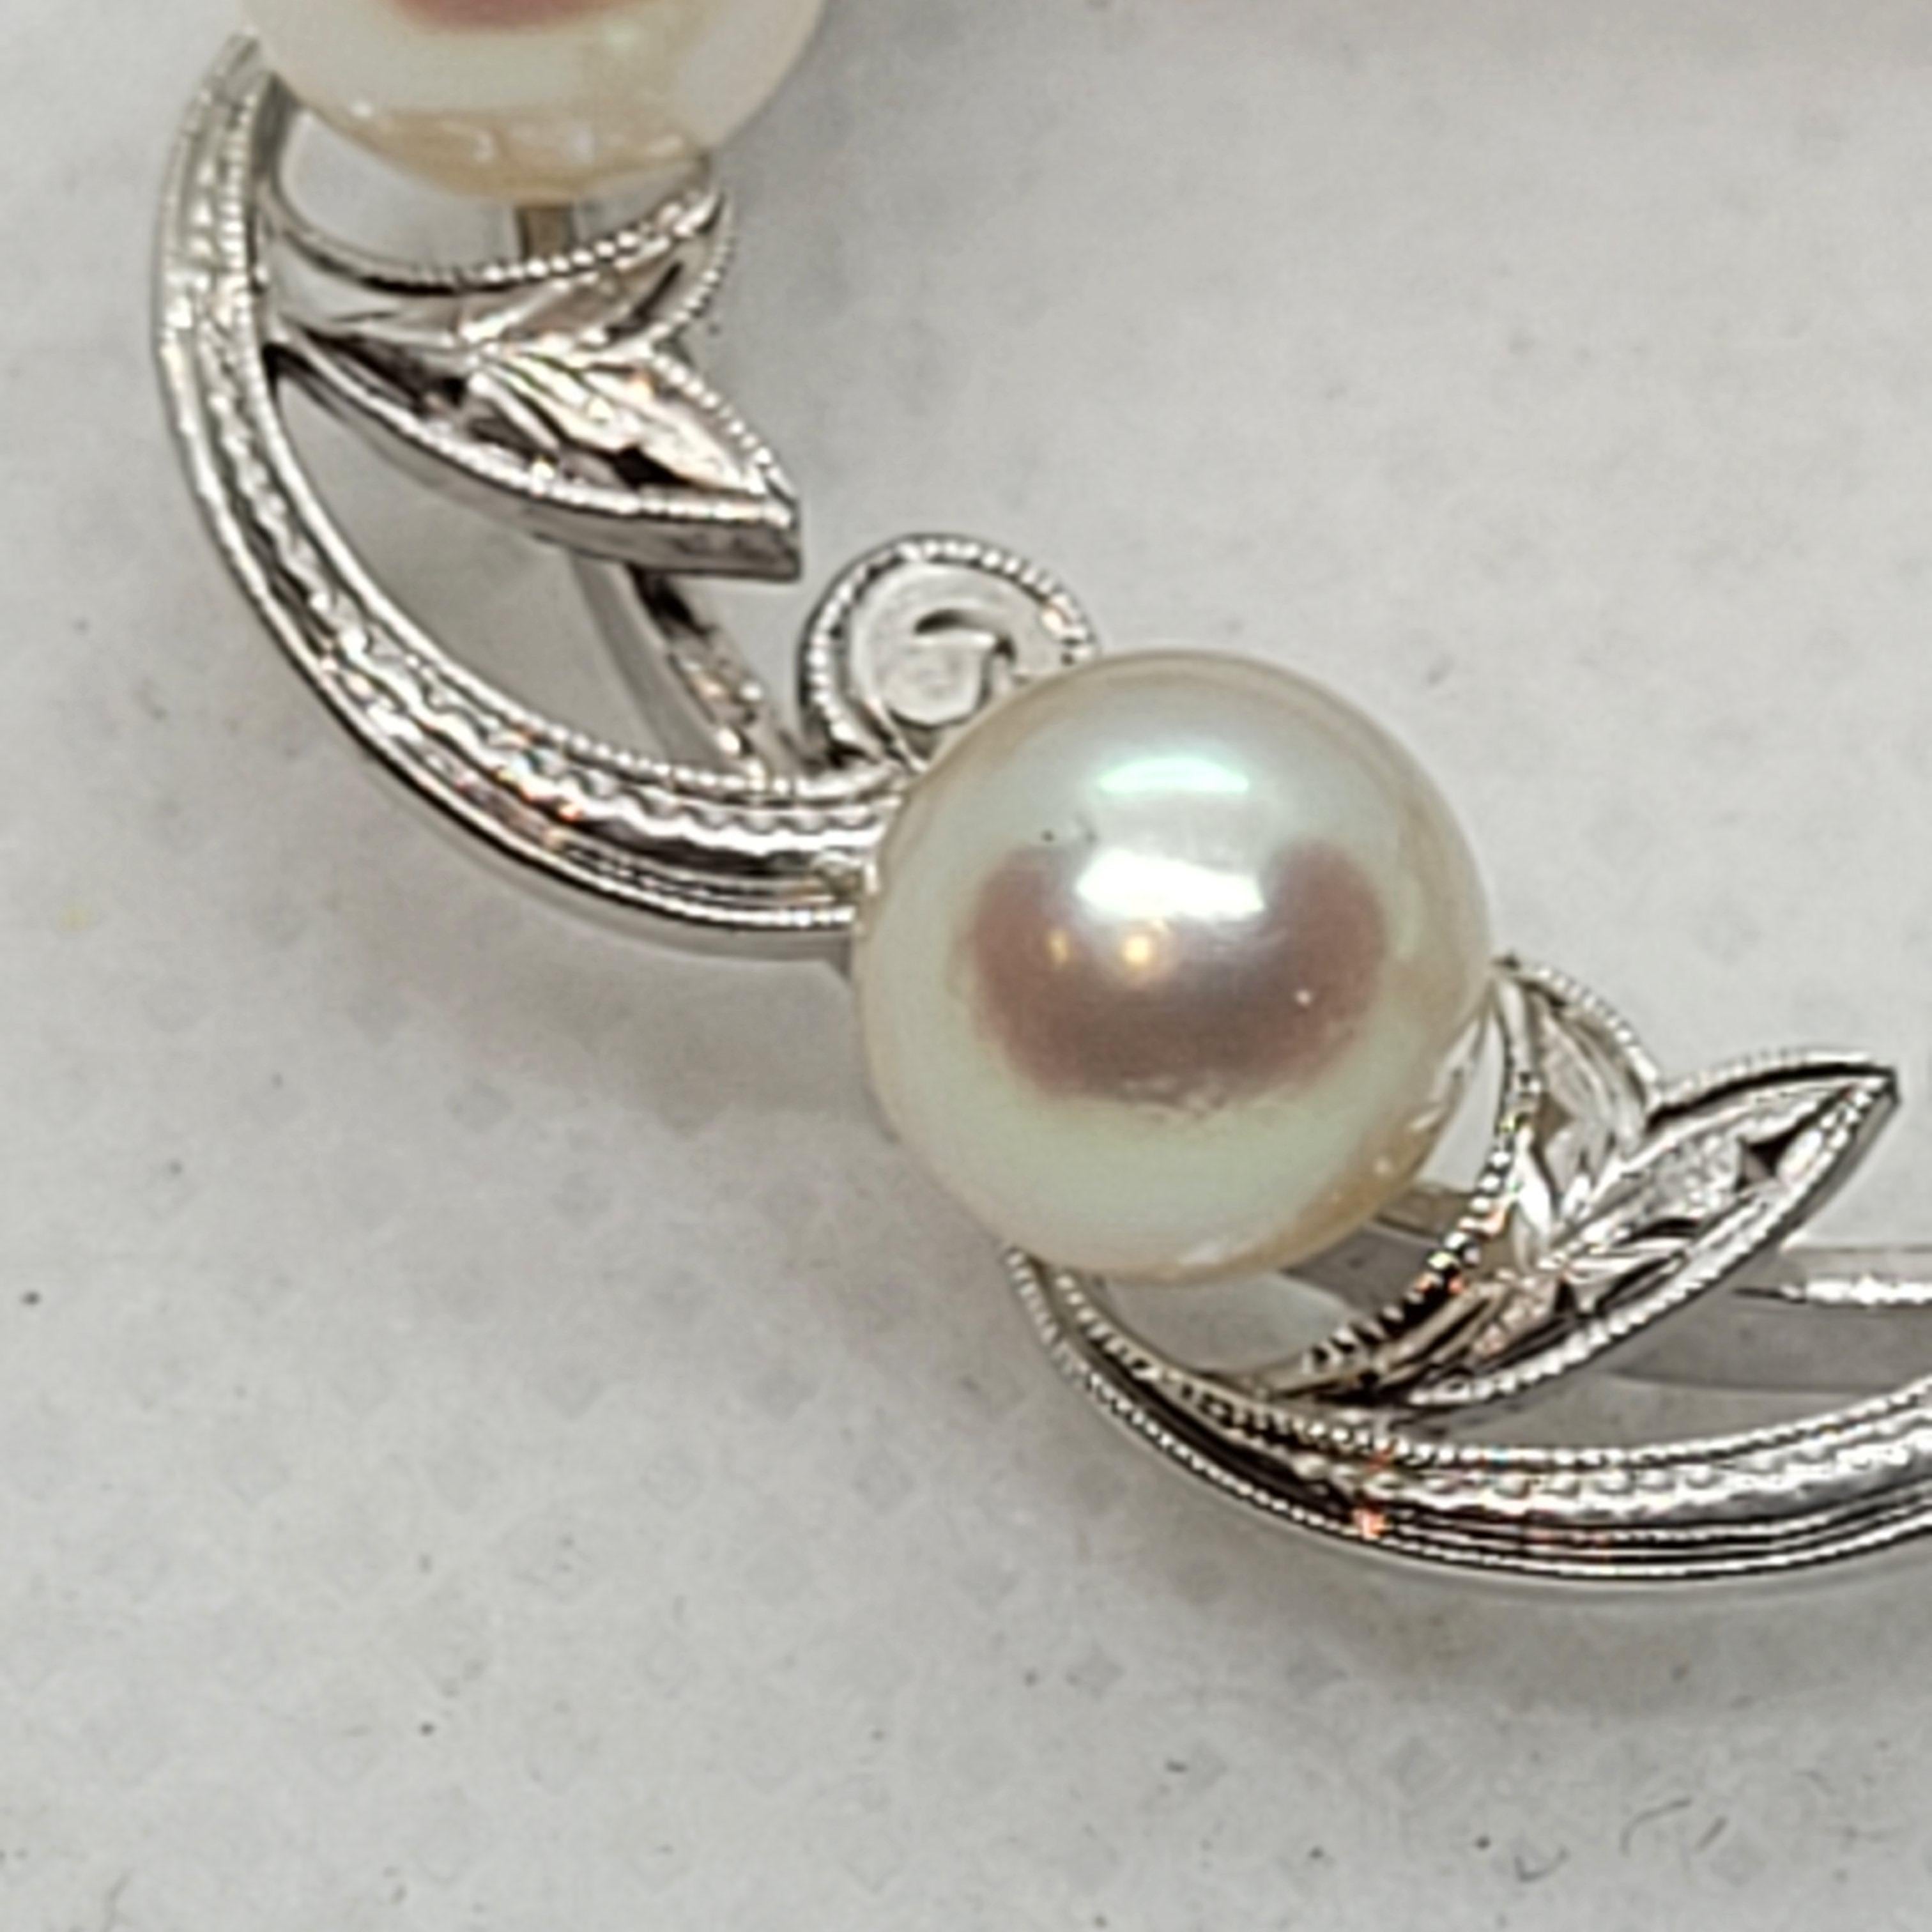 Women's or Men's Sterling Silver Mikimoto Pearl Brooch, Tokyo, Stamped, 1960s, Vintage